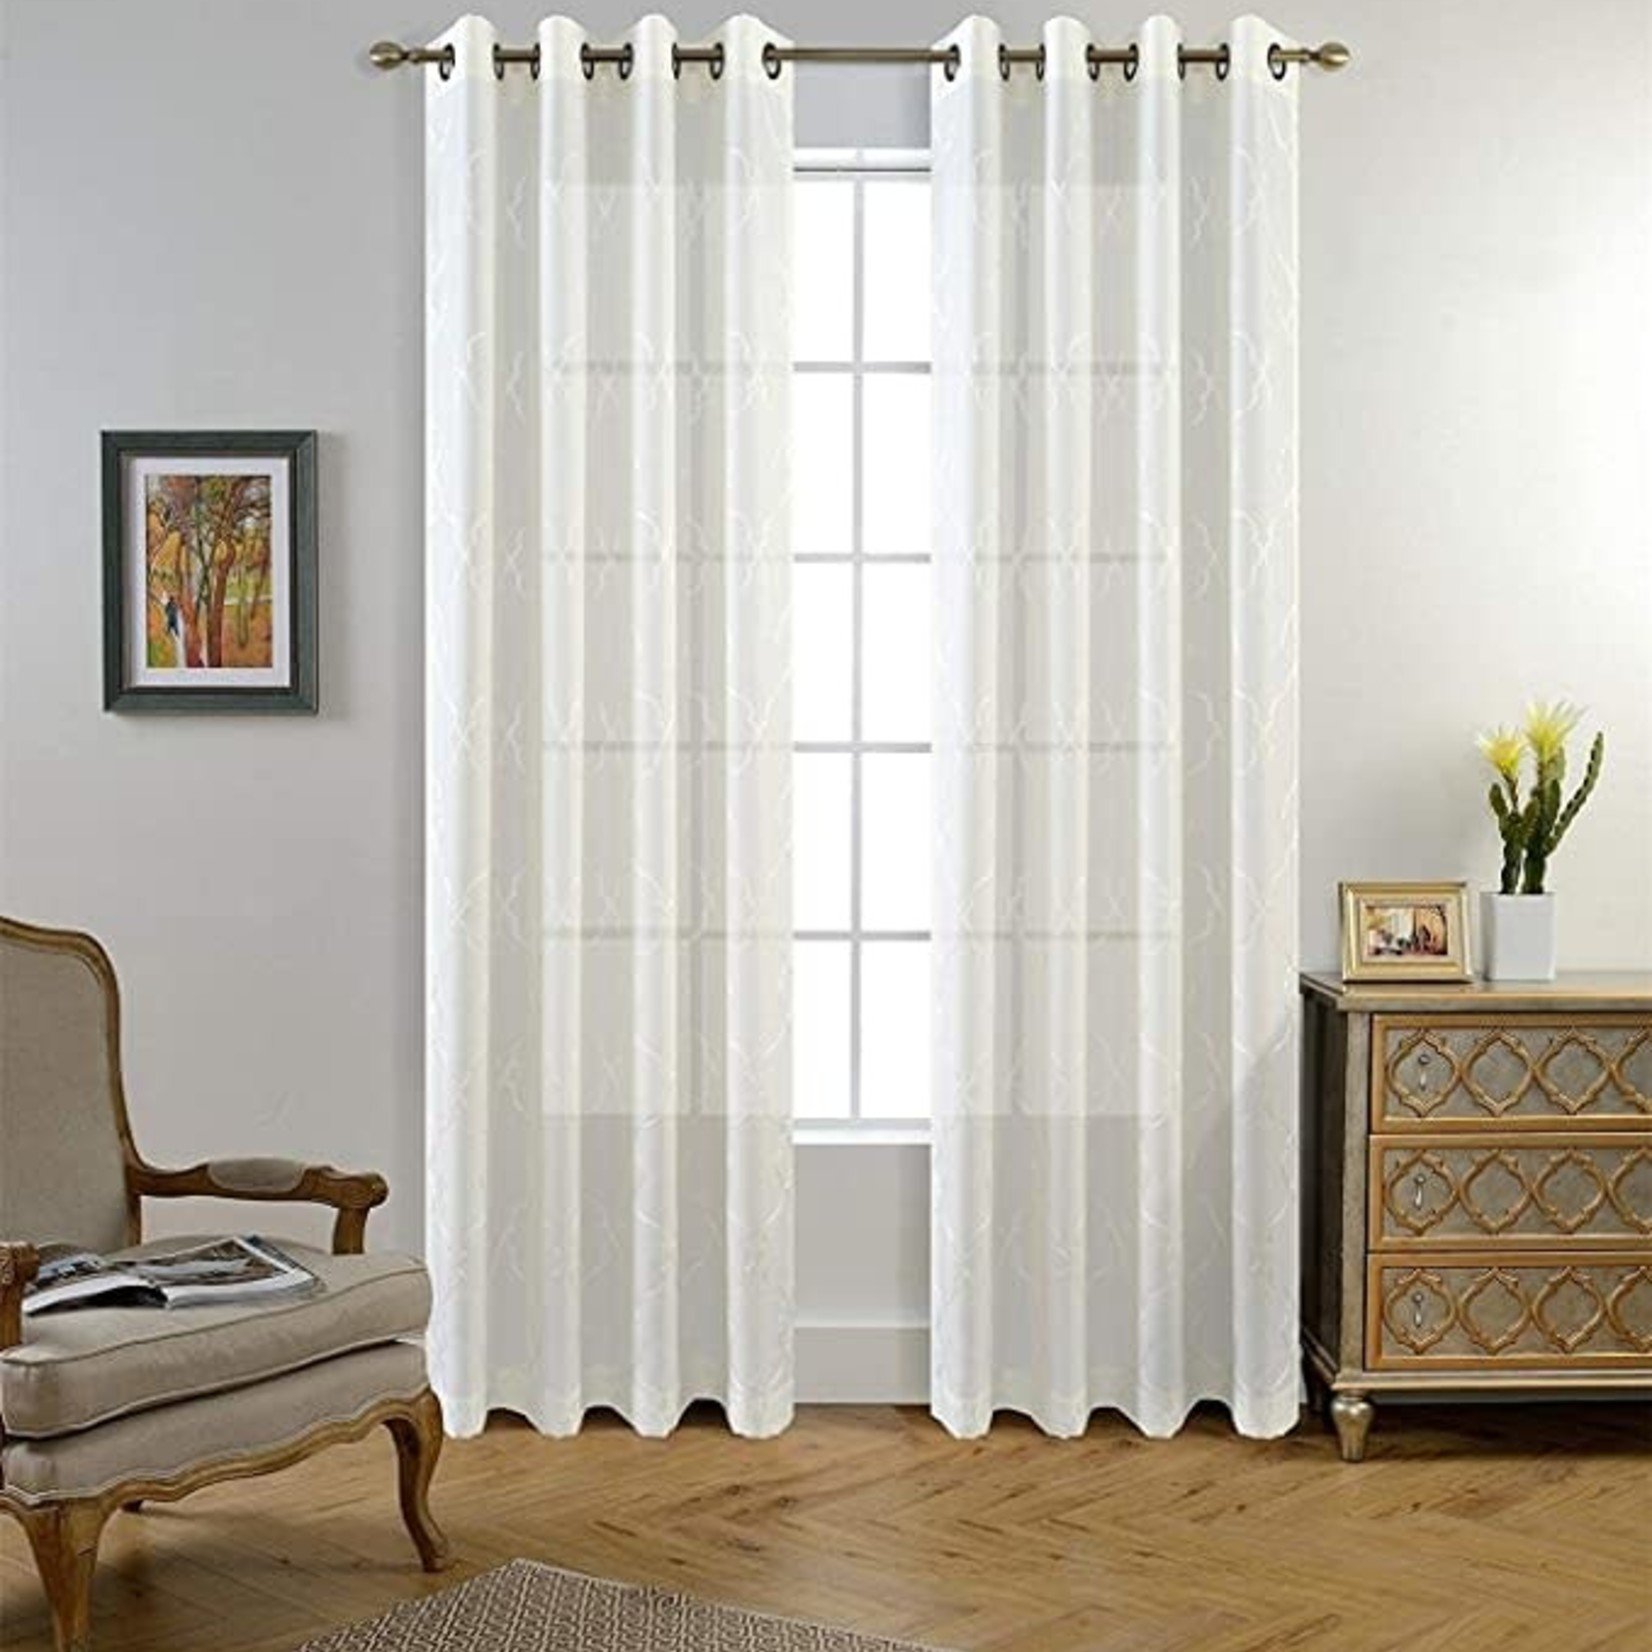 Miuco Embroidered Semi Sheer Curtains 2 Pc Set - 95 x 24 - White